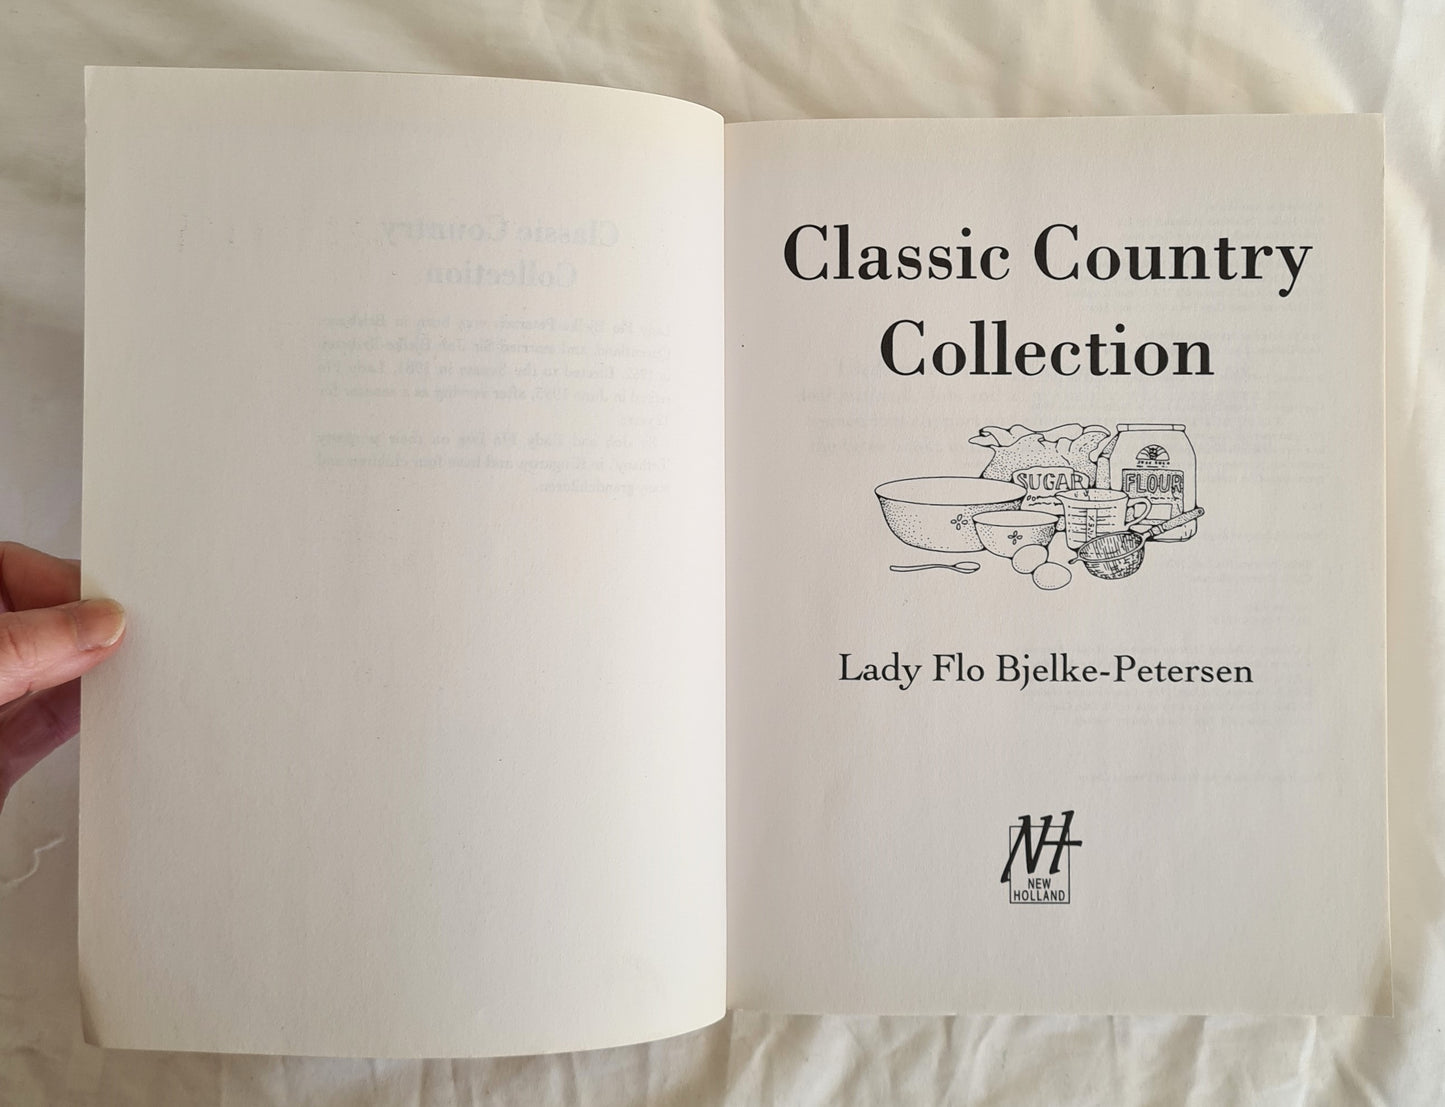 Classic Country Collection by Lady Flo Bjelke-Petersen